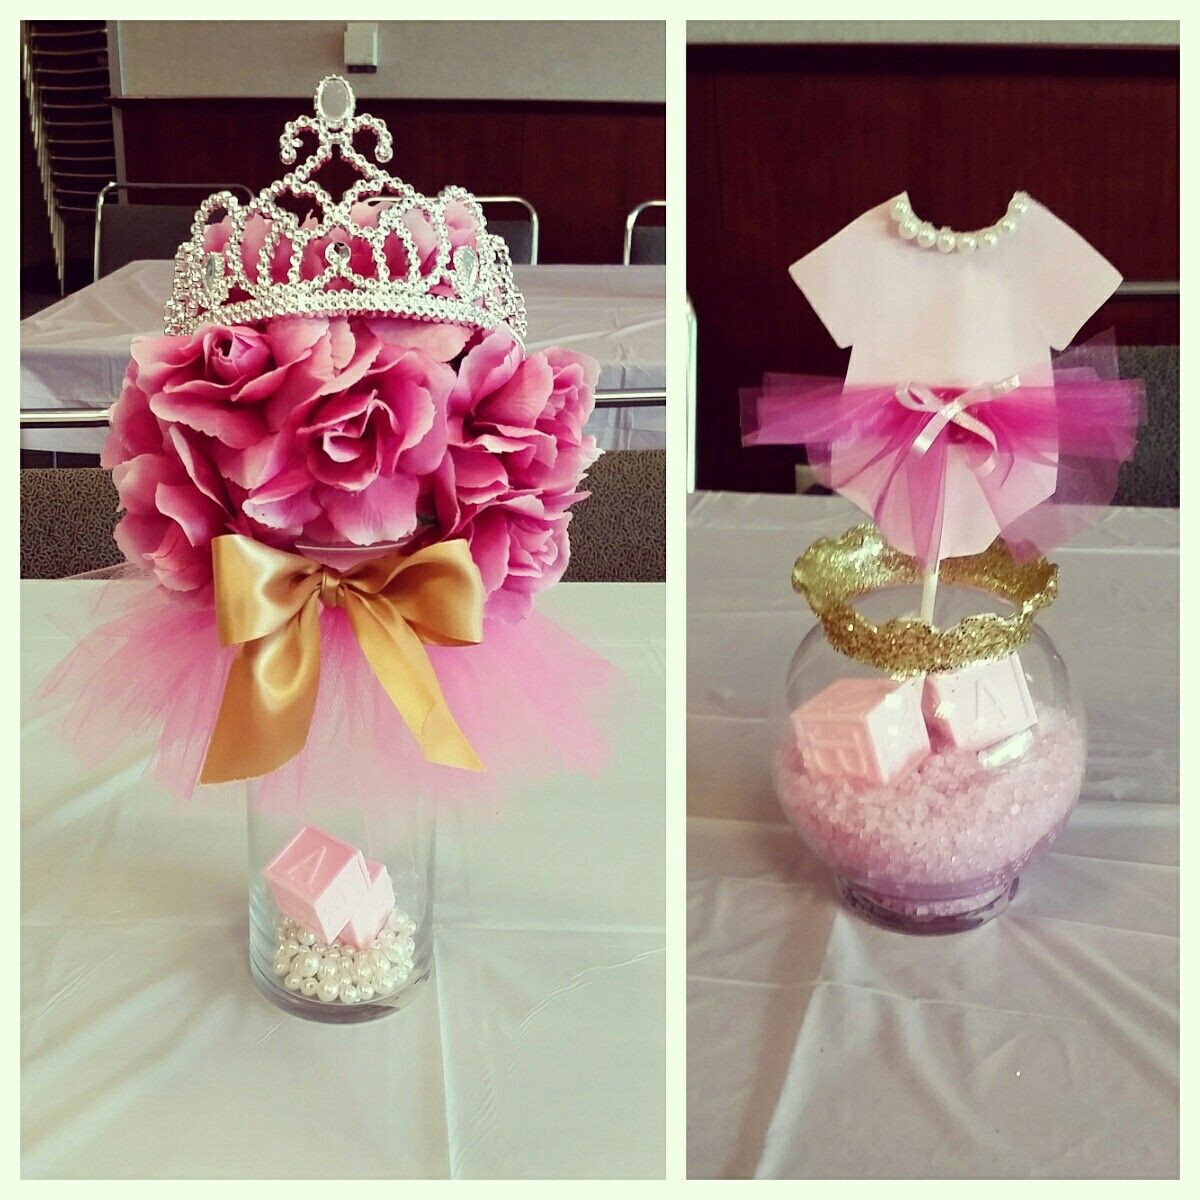 DIY Baby Shower Centerpieces For Girls
 Tutus & Tiaras Baby Shower centerpieces pinkandgold